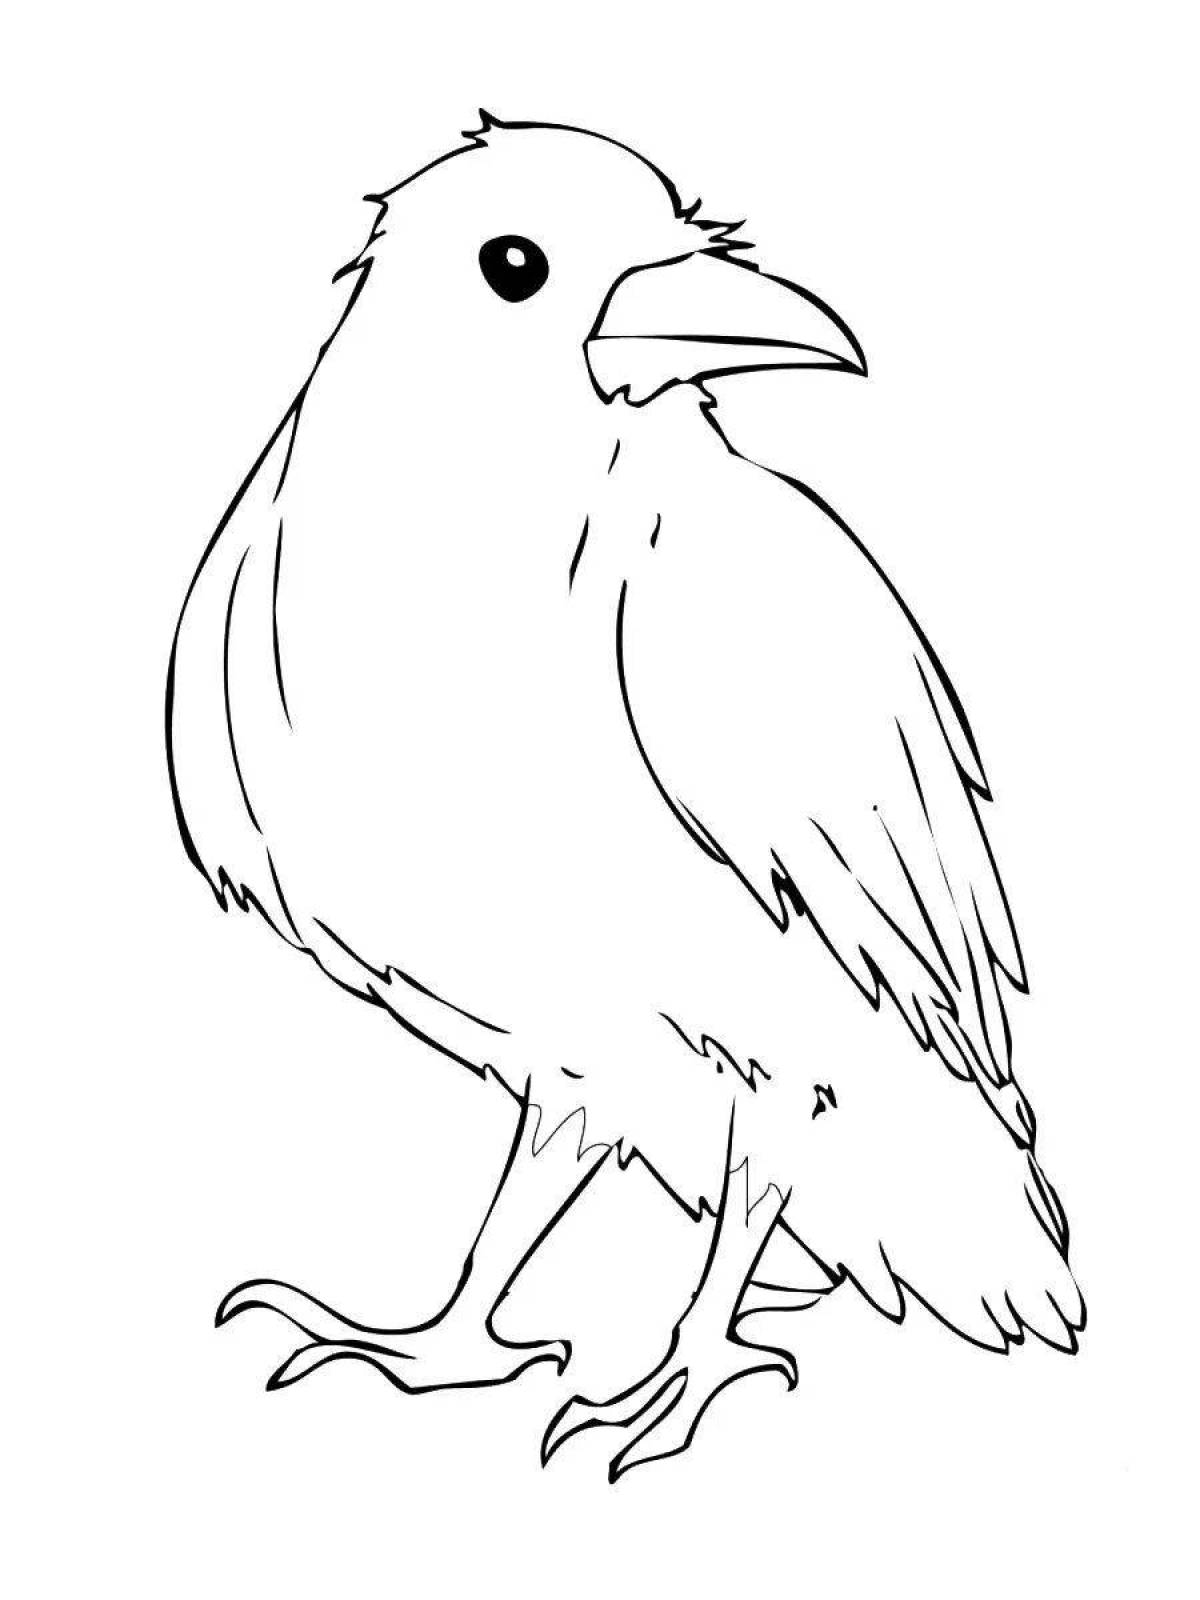 Innovative crow coloring page for 3-4 year olds